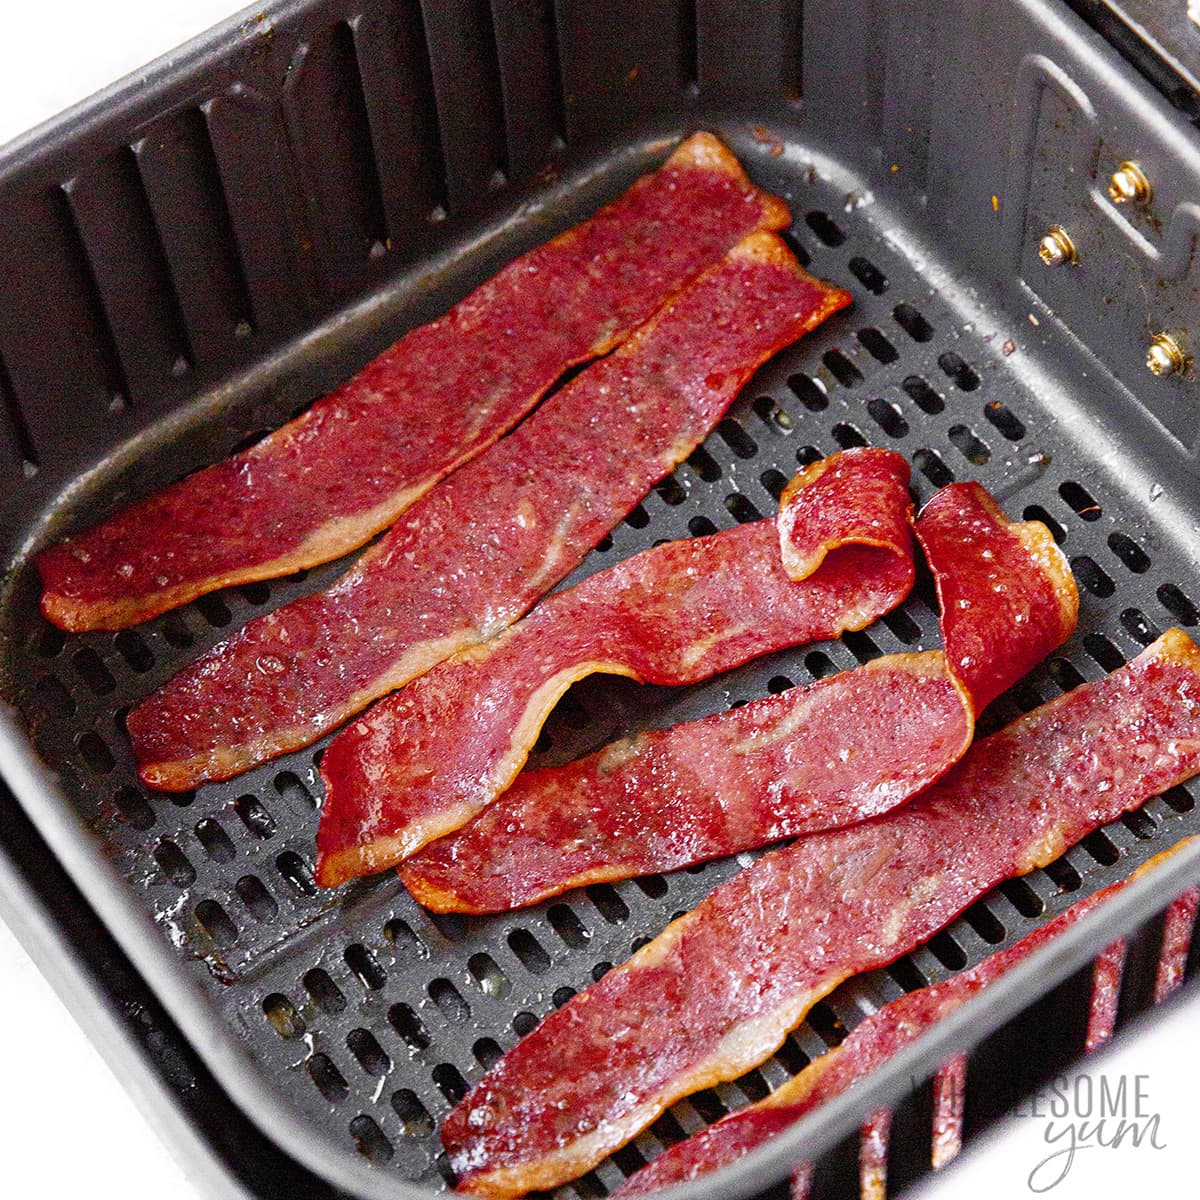 Cooked turkey bacon in the air fryer basket.